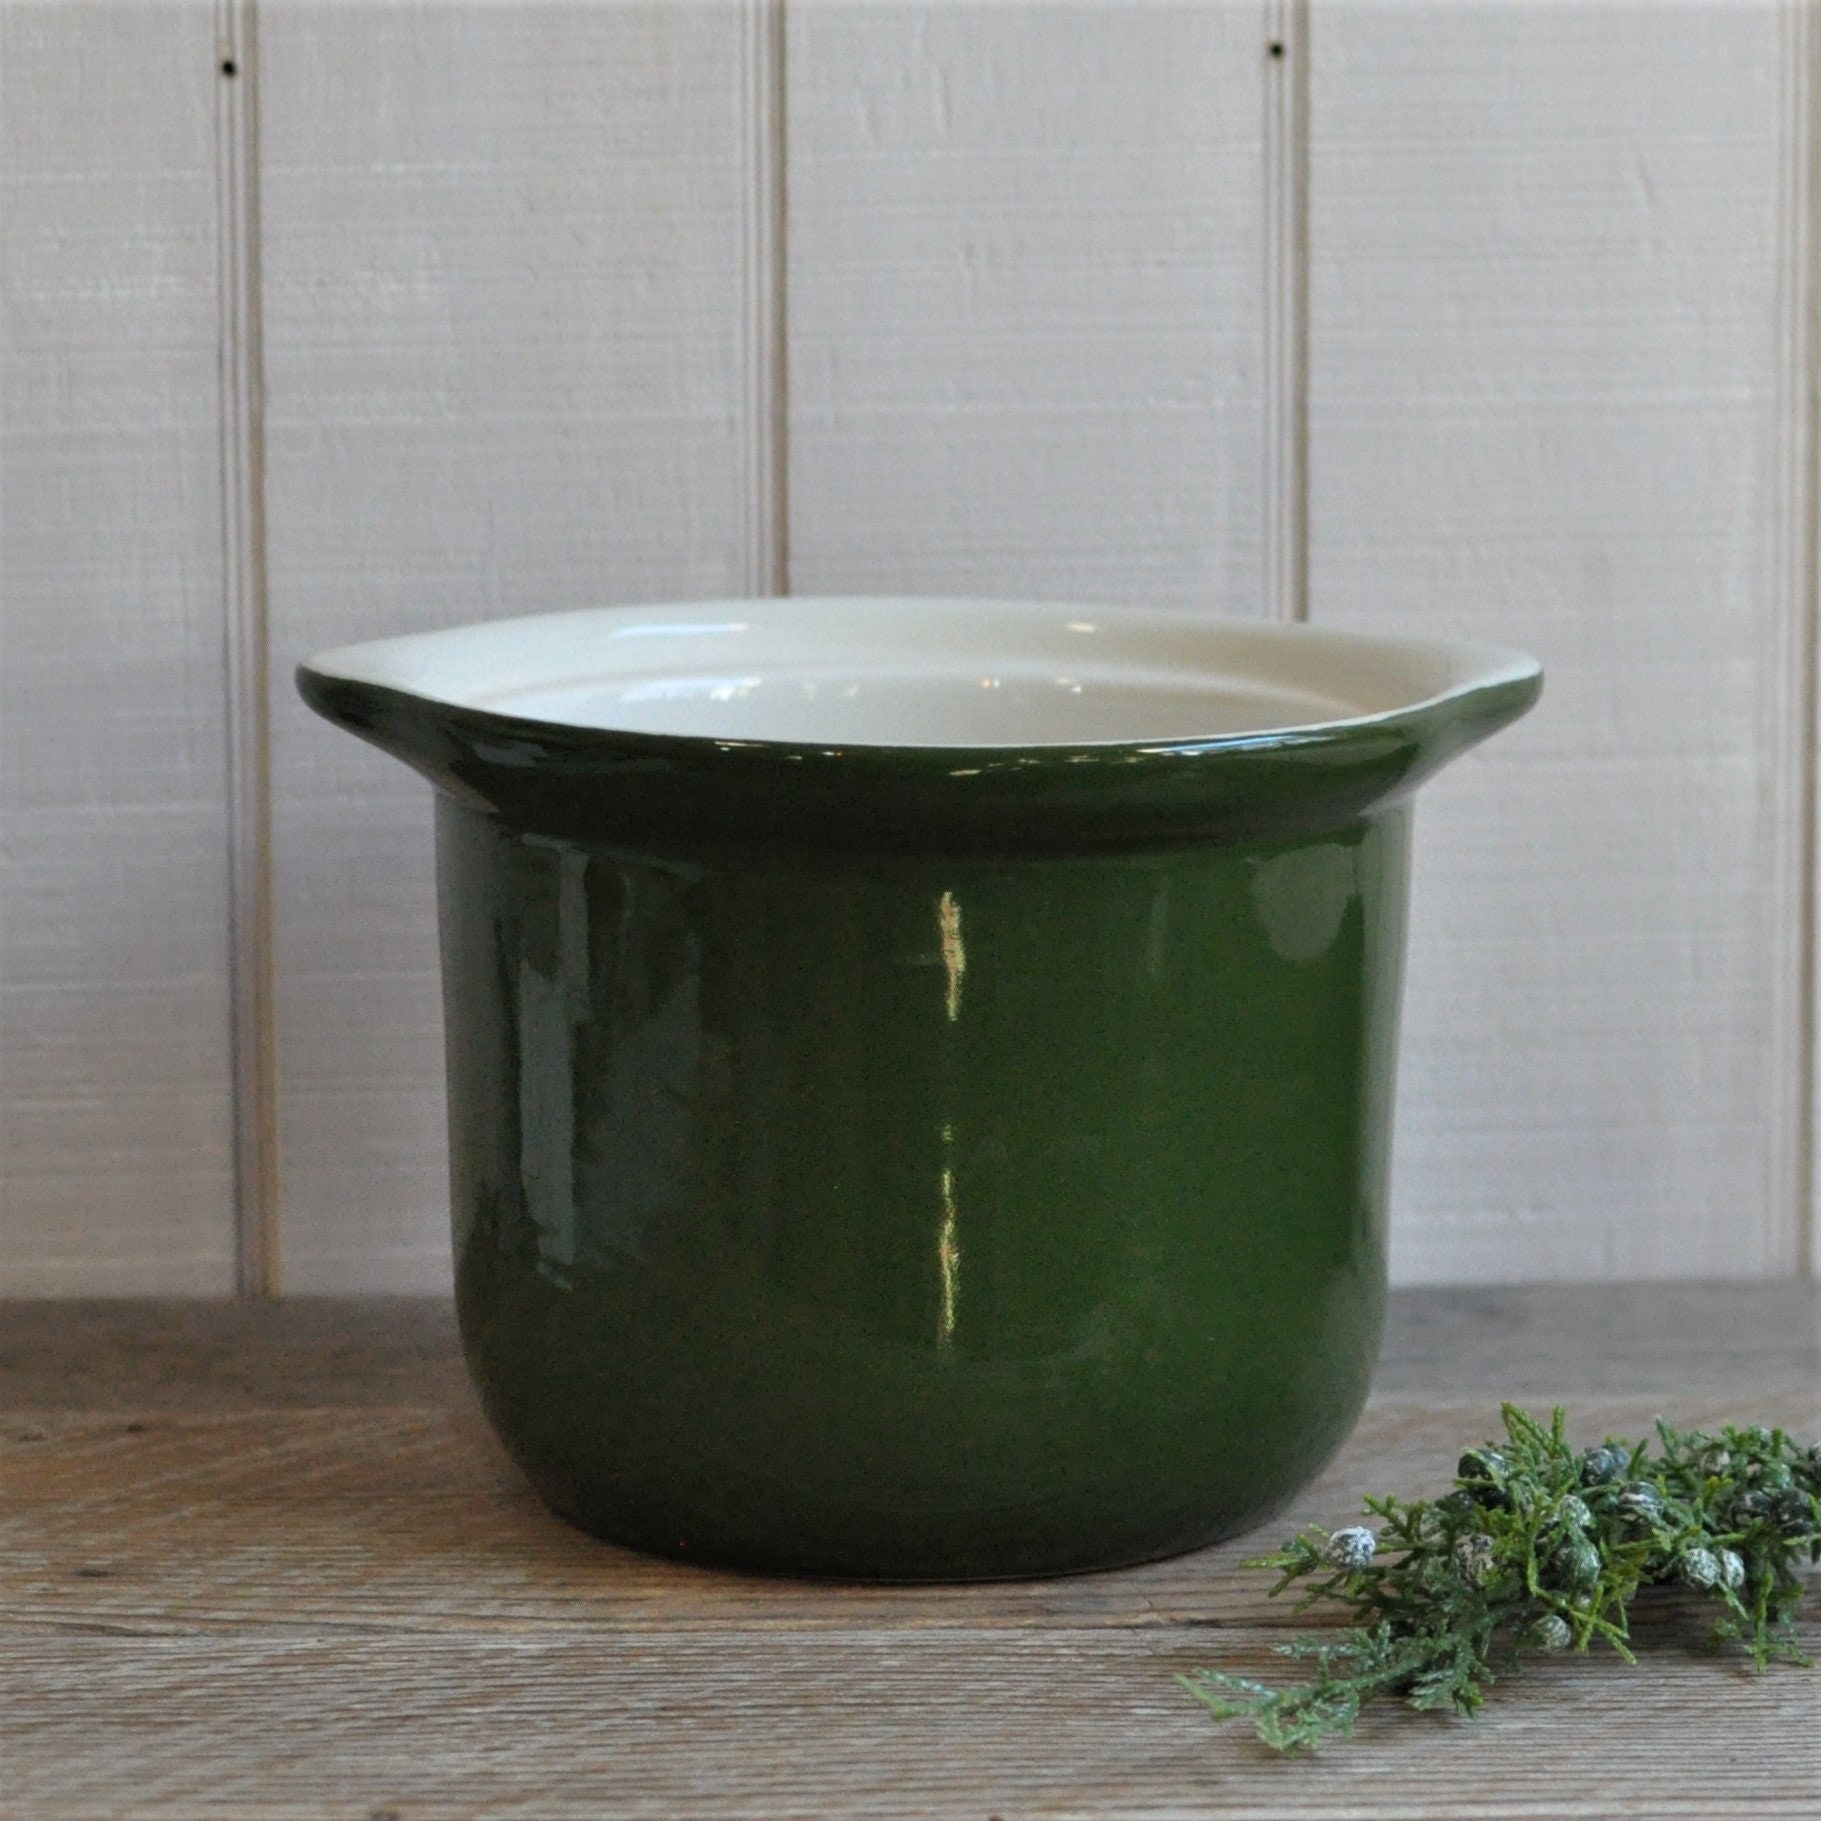 How To Use AND Shop For The Classic Bean Pot + We're Making Sea